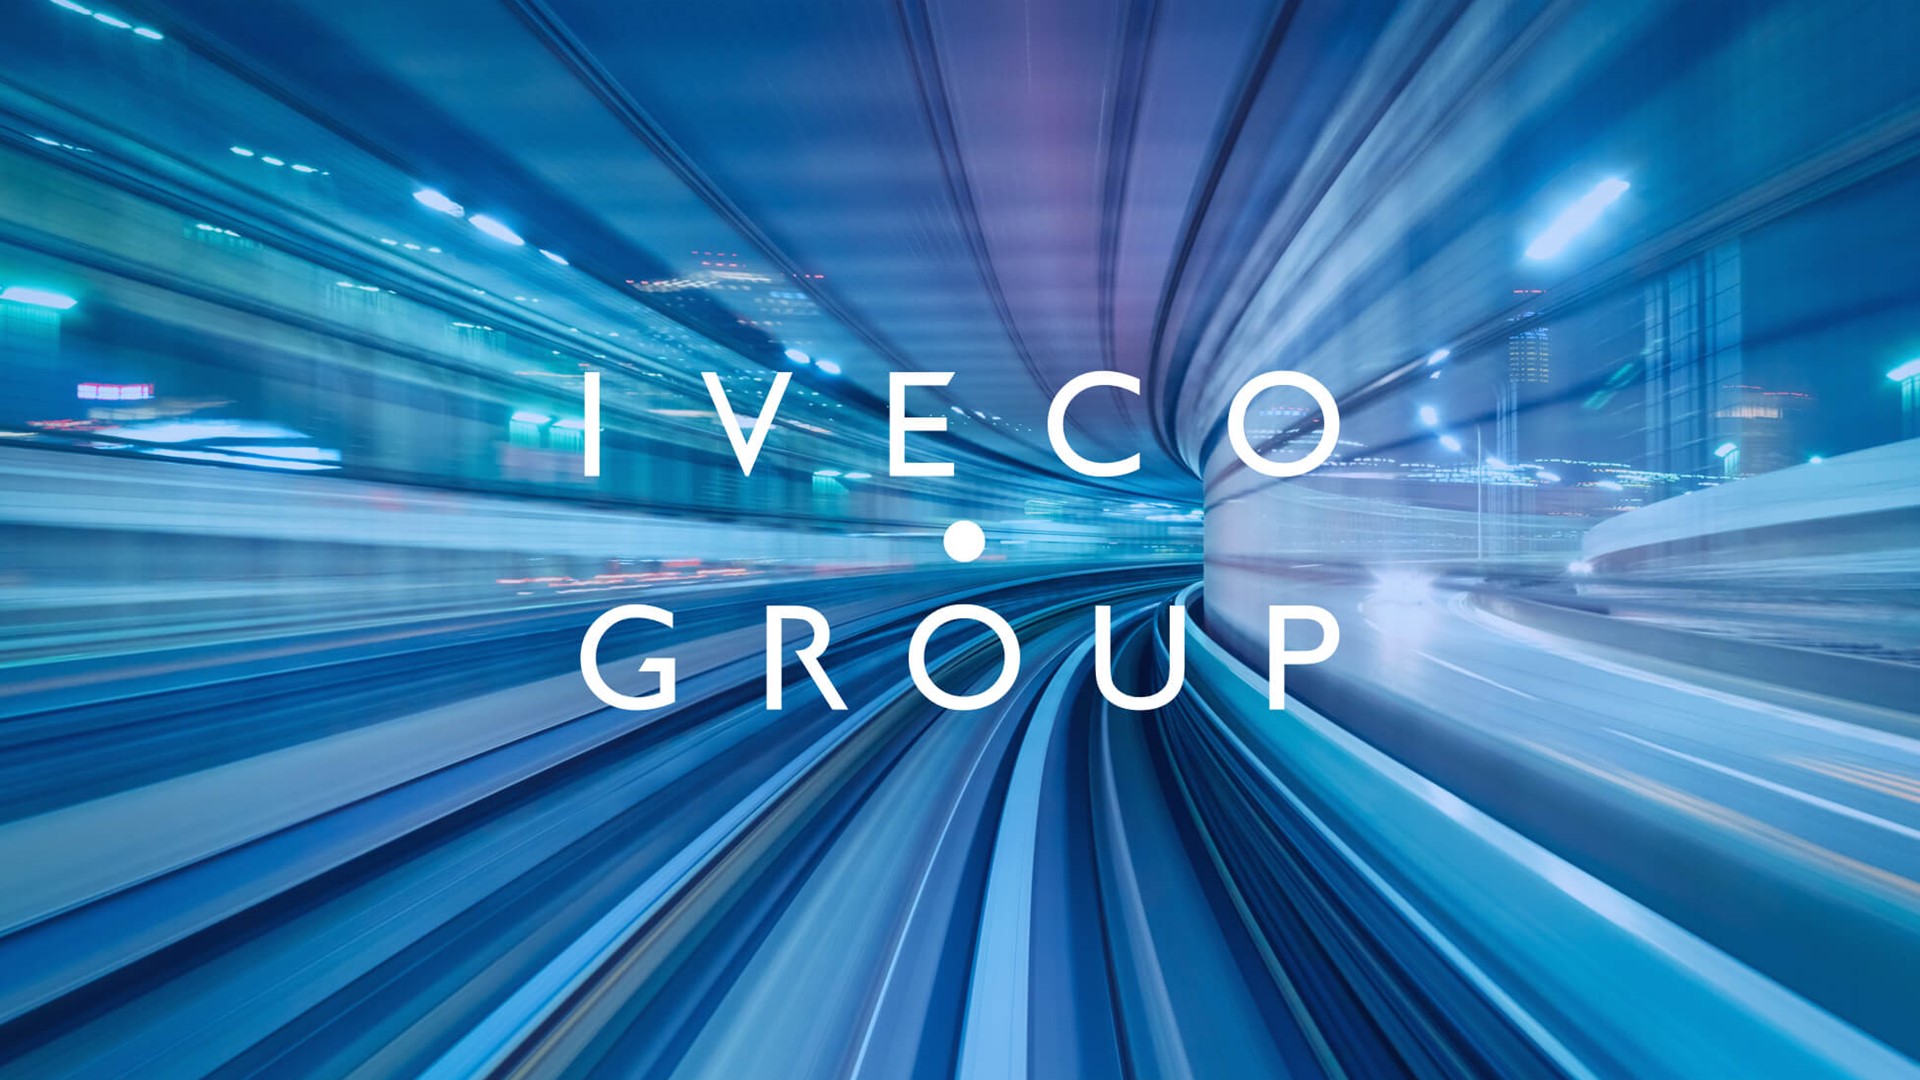 Iveco Group - background 11